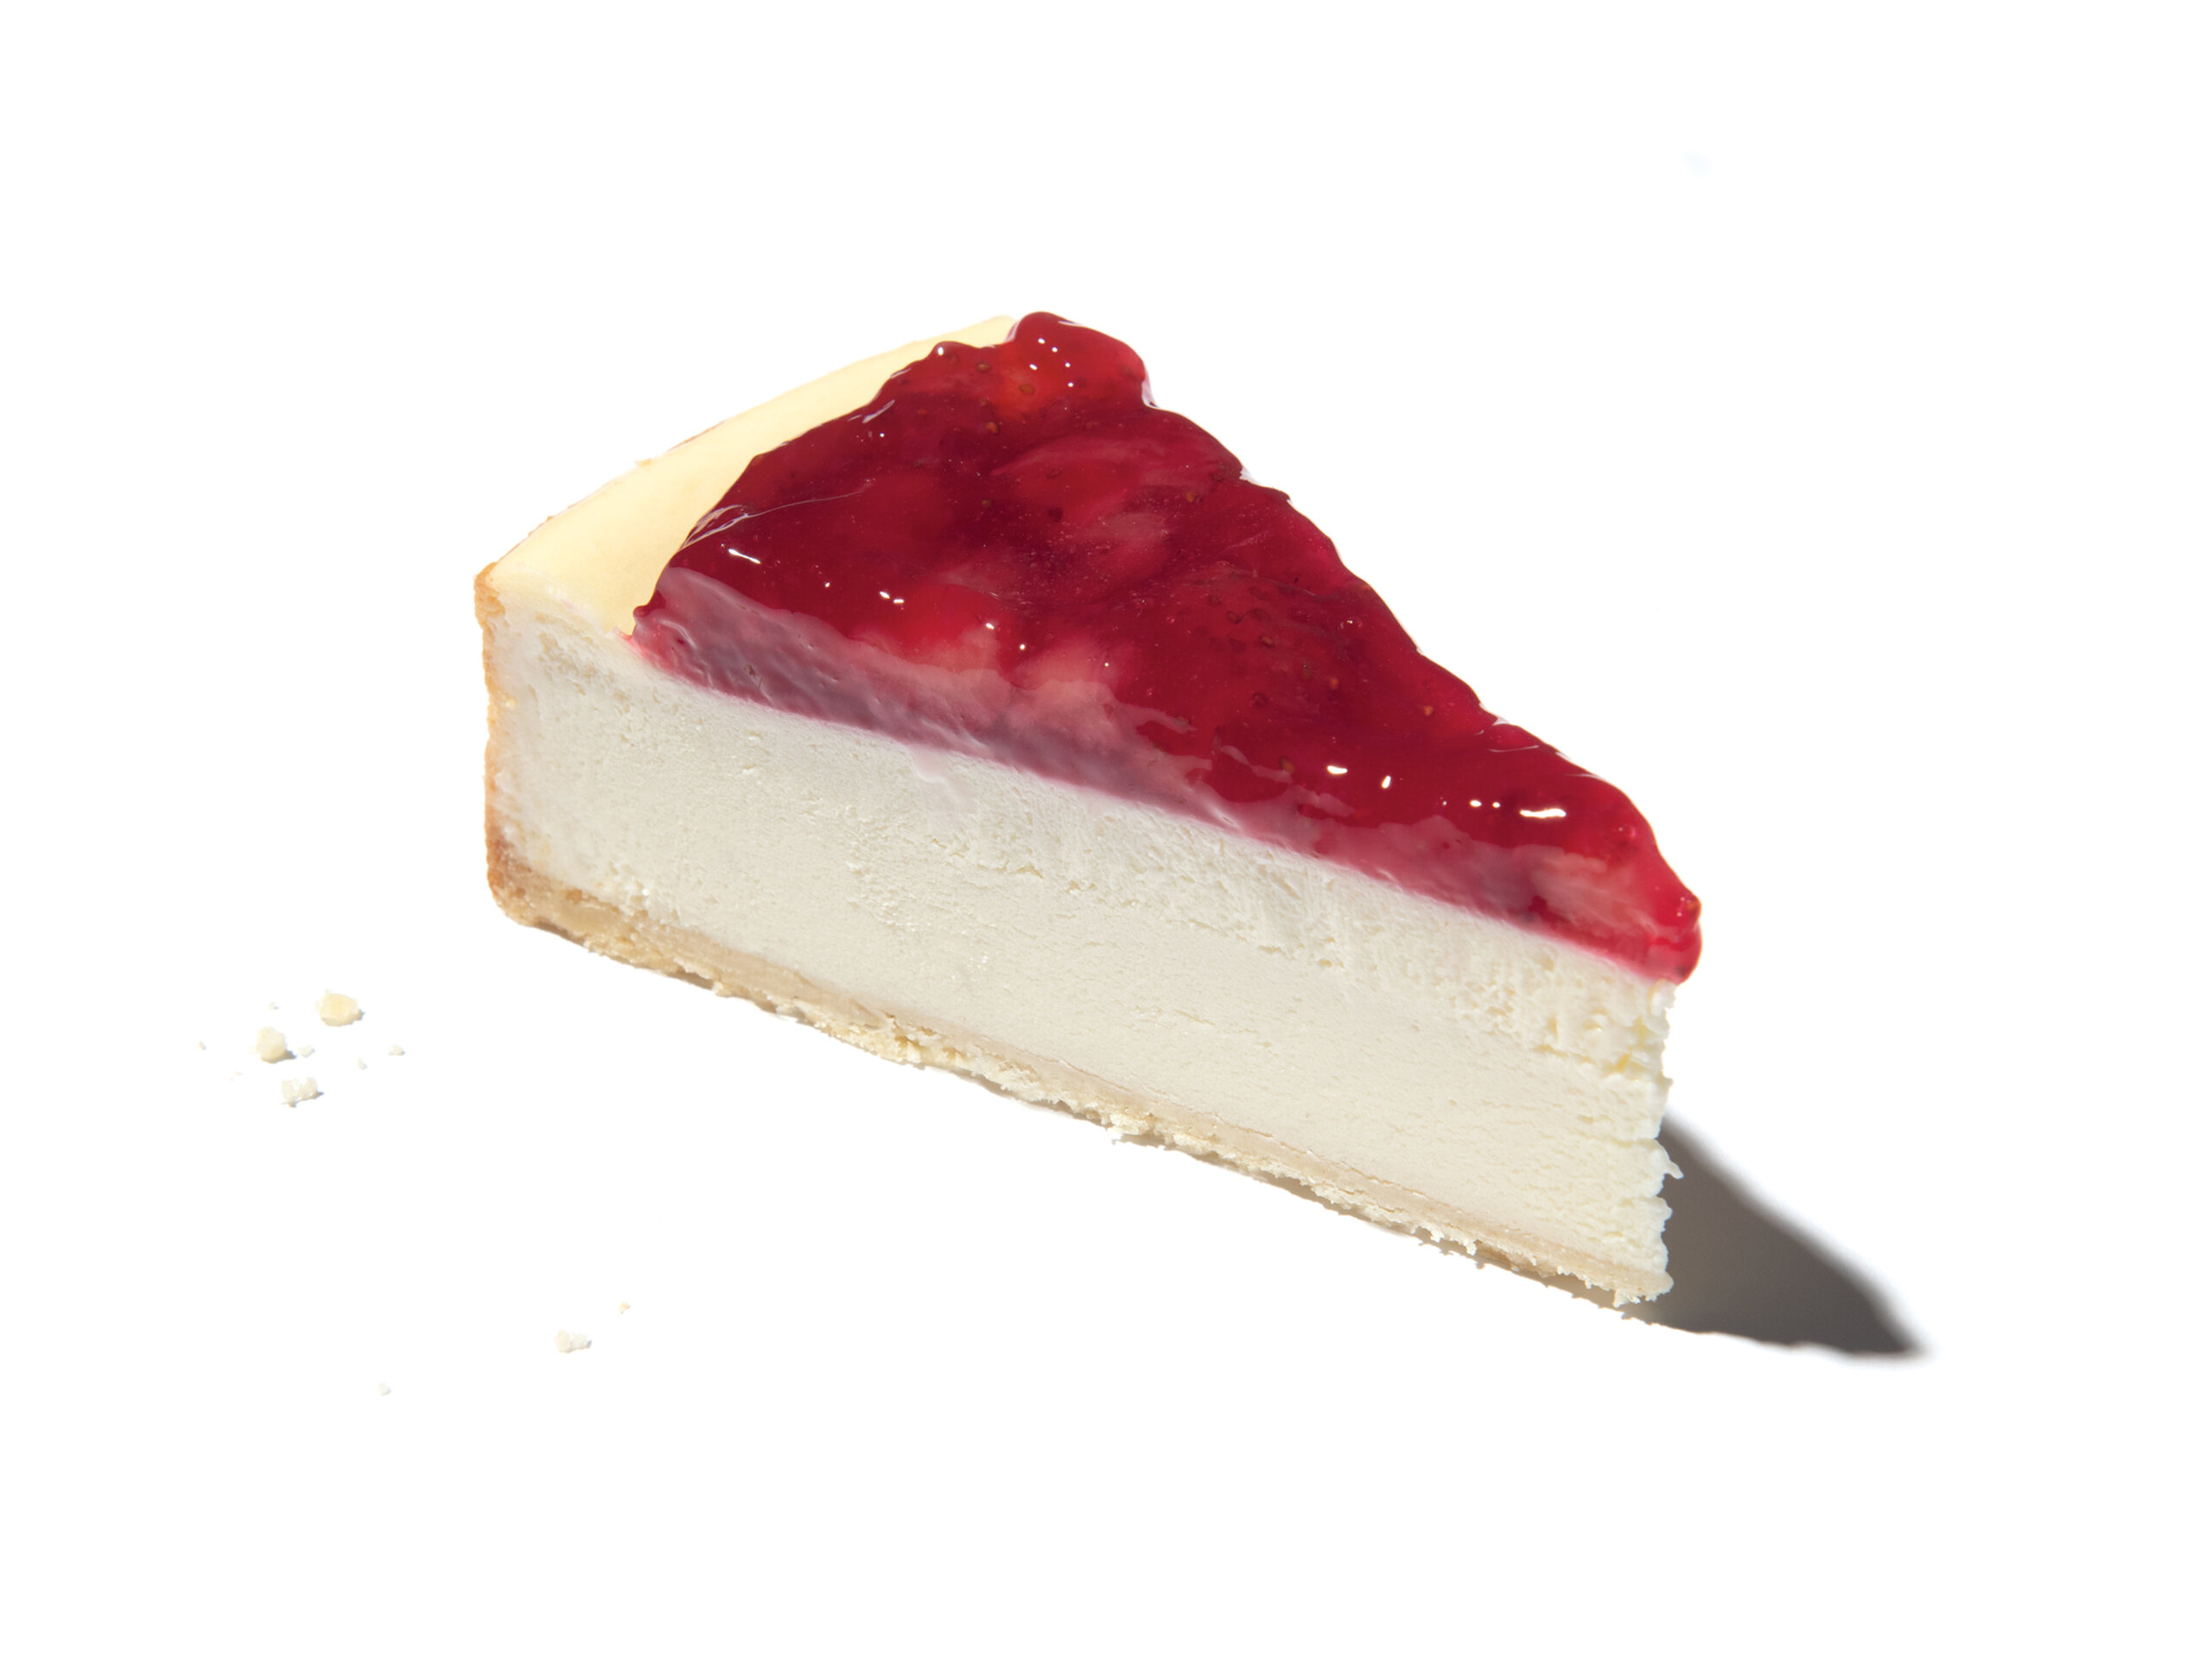 A slice of Eli's Strawberry Topped Cheesecake